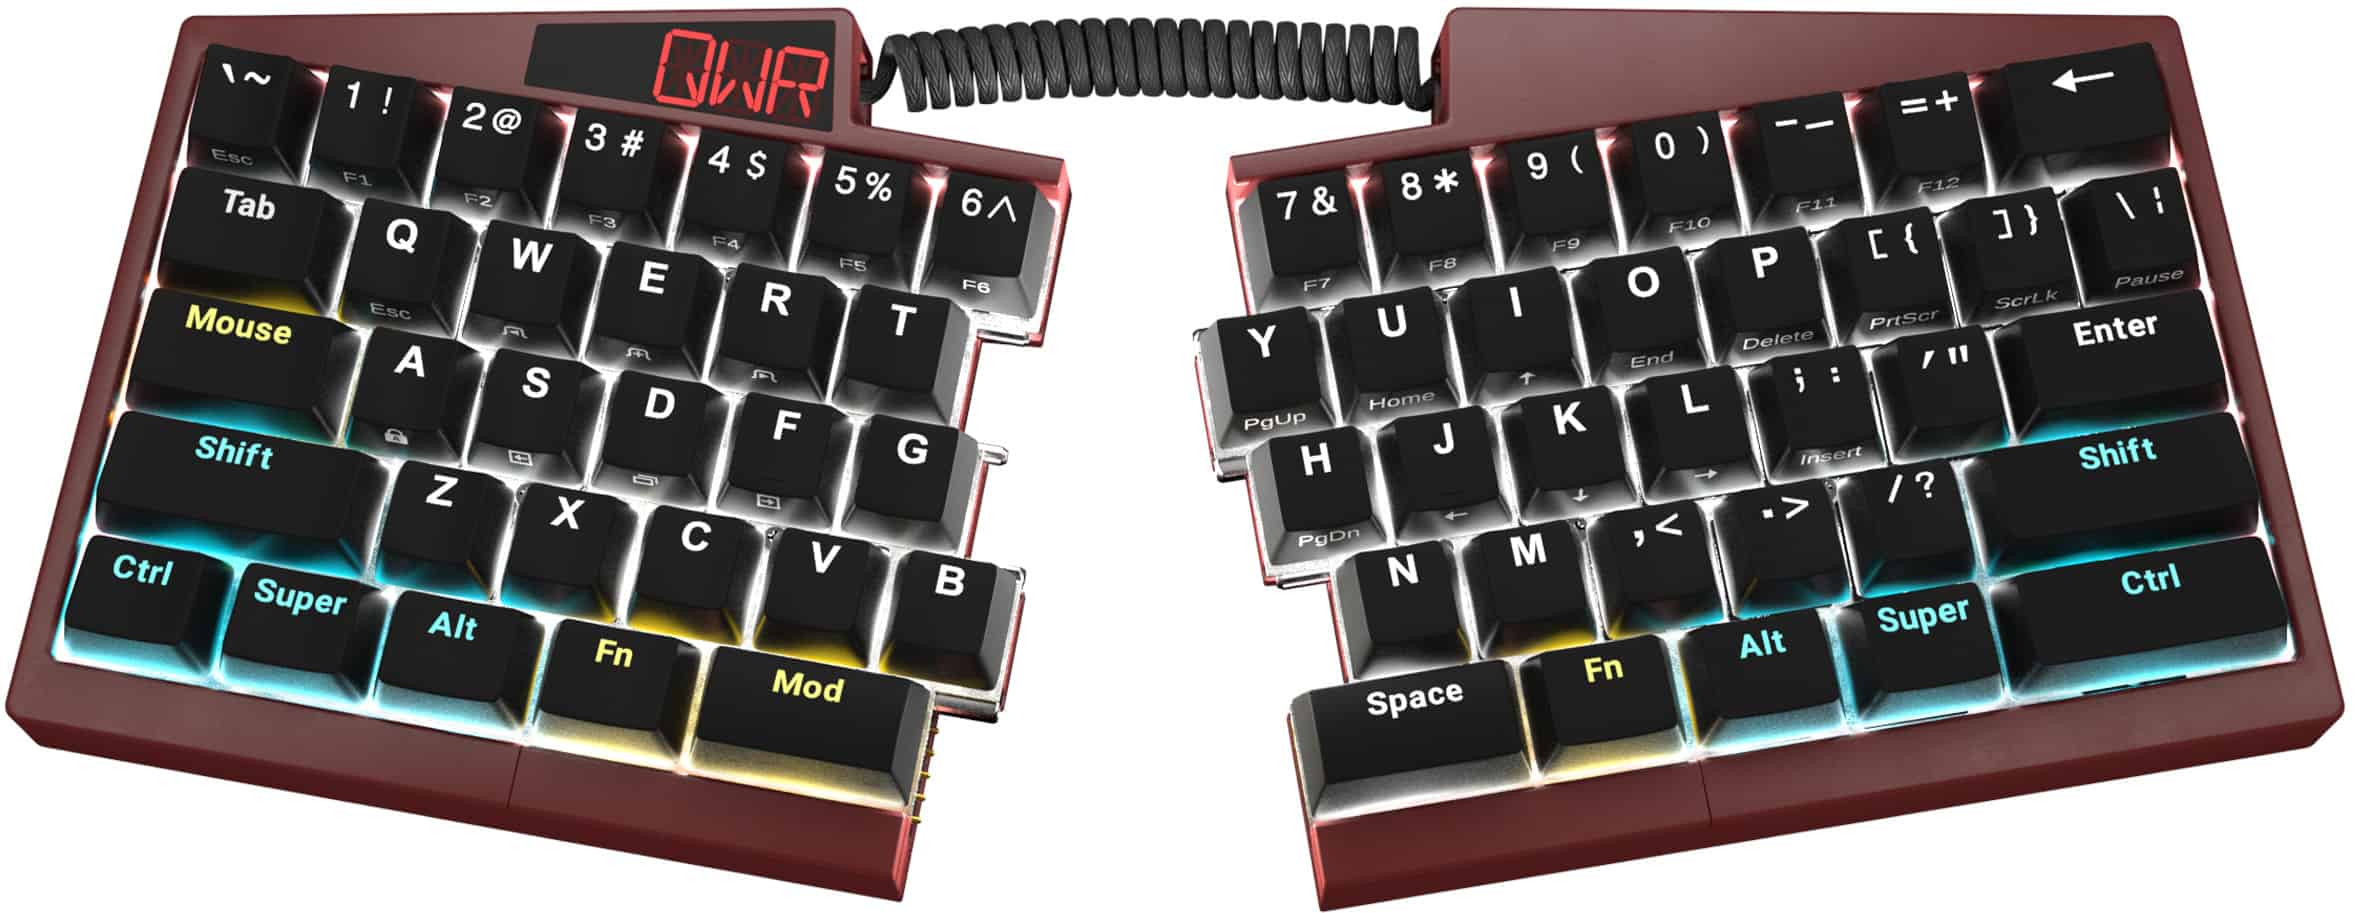 Ultimate Hacking Keyboard – The keyboard. For professionals.